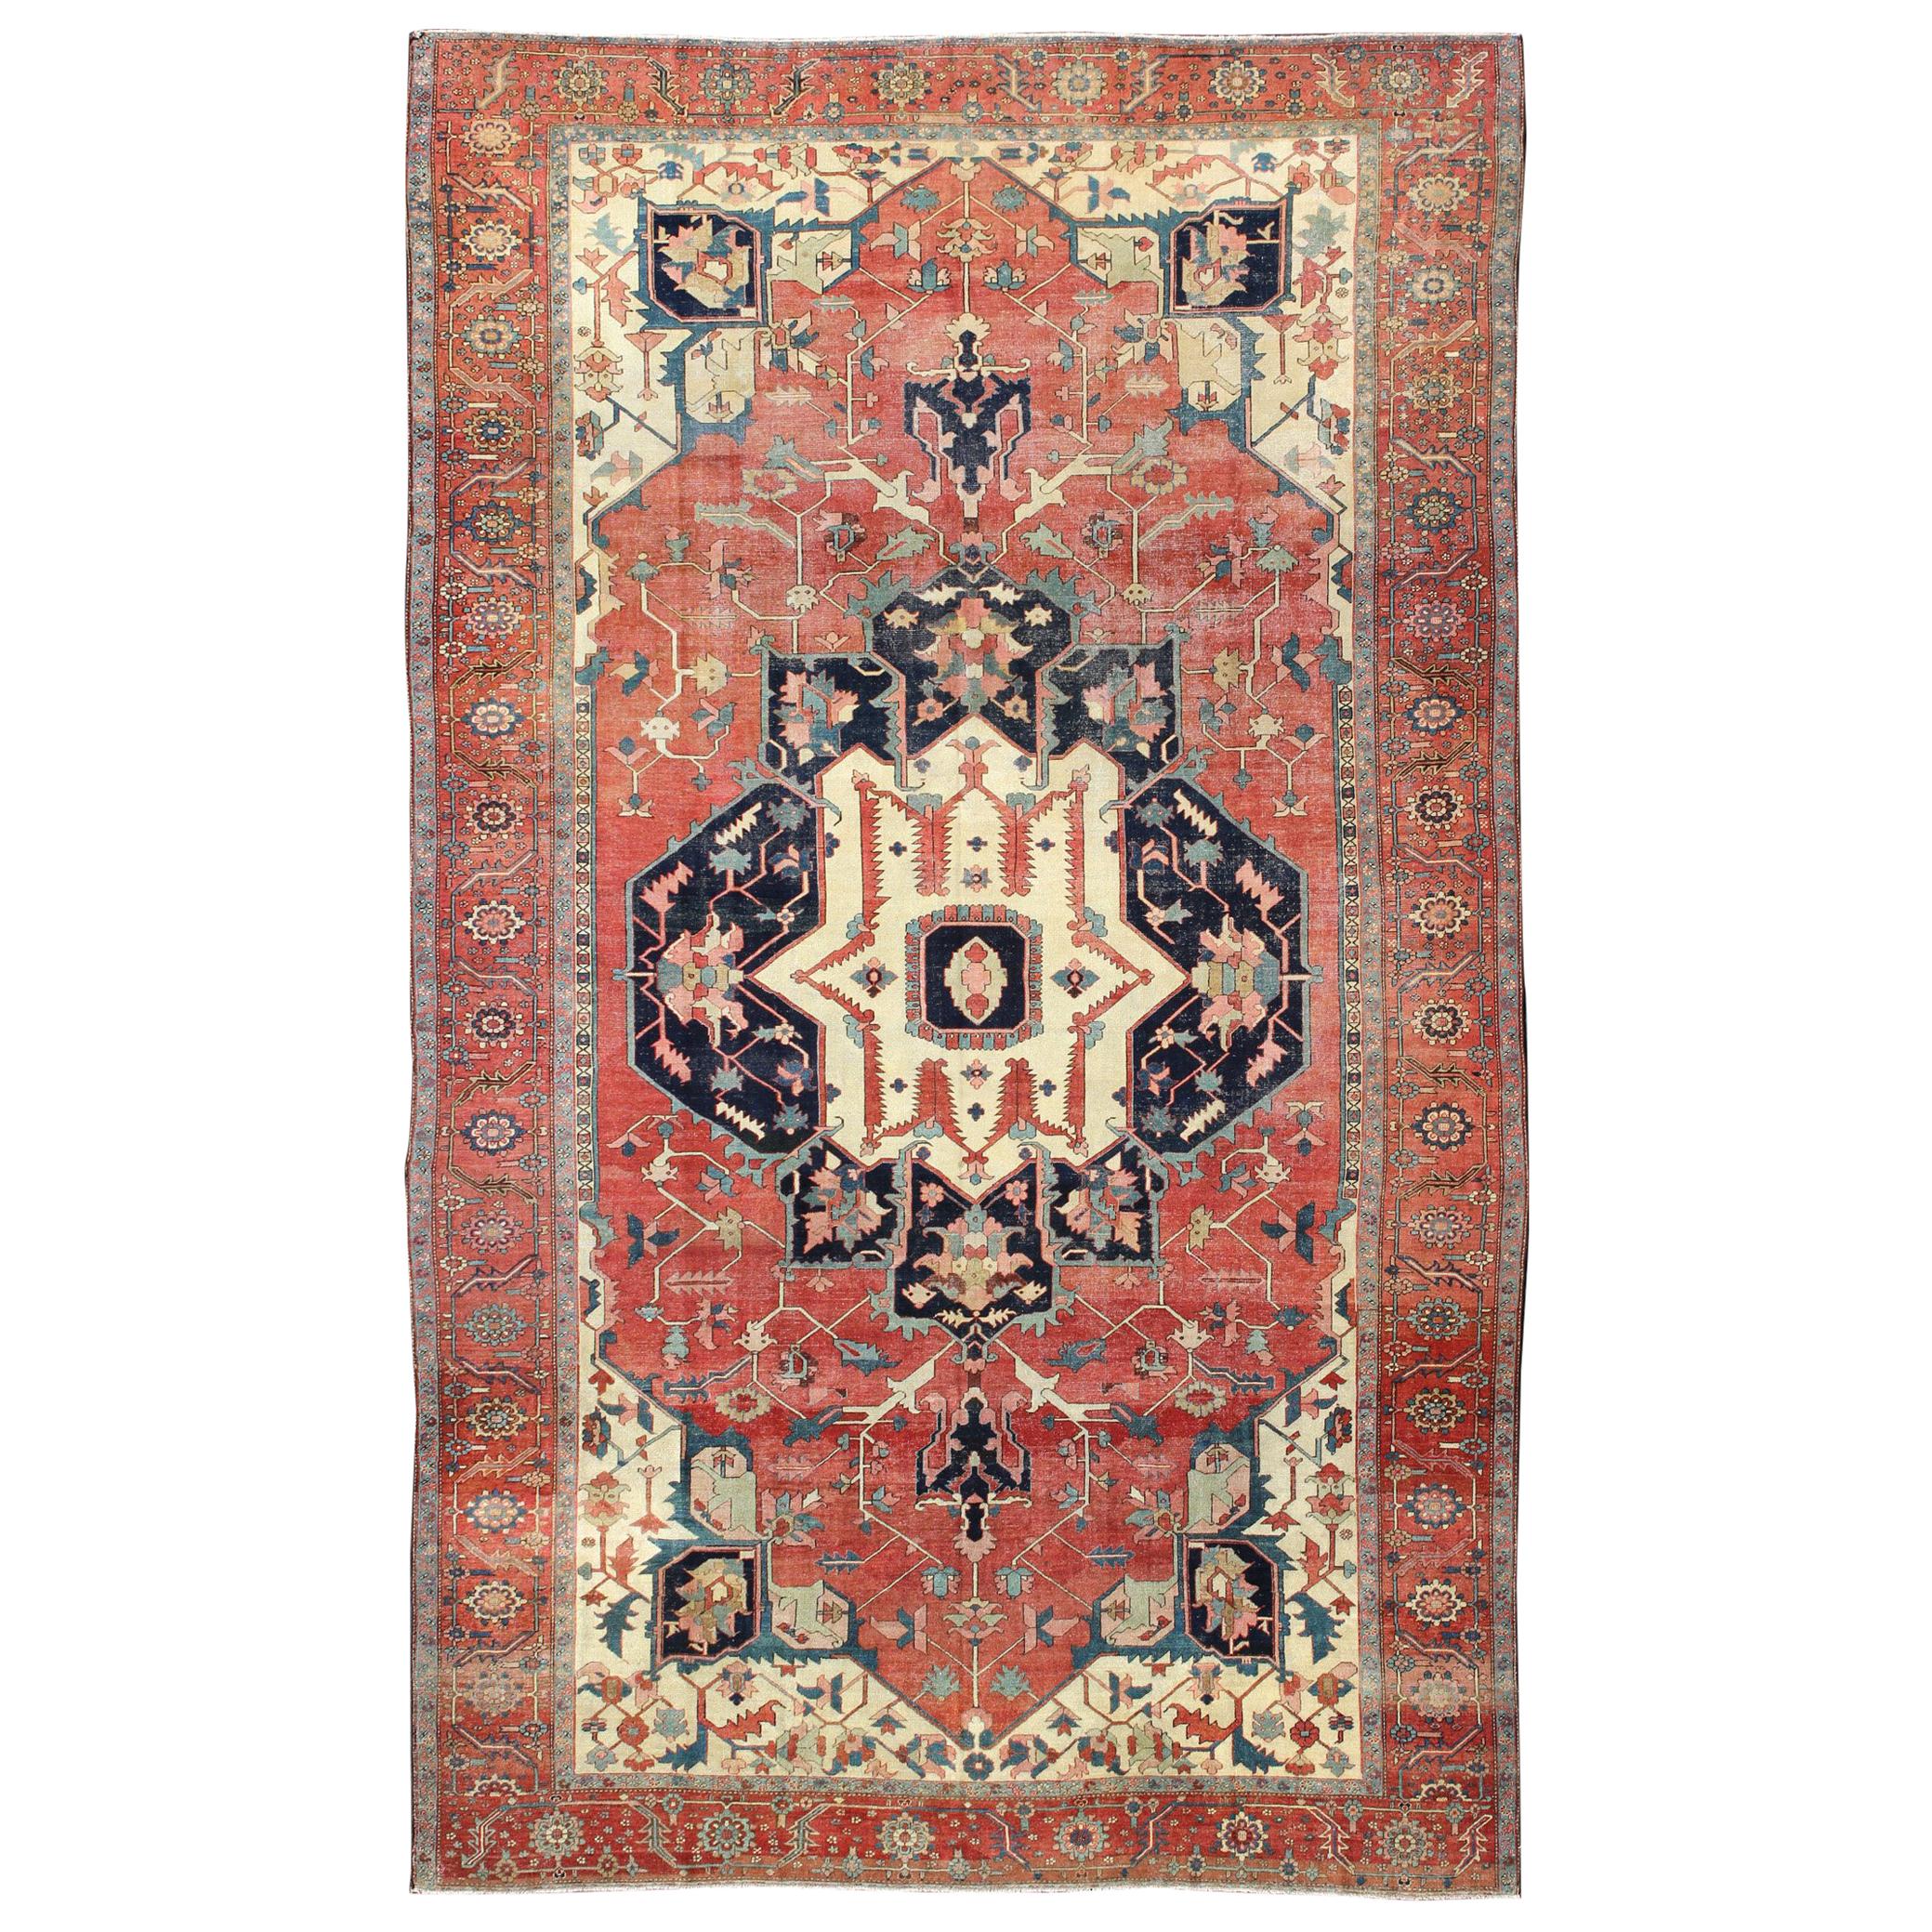 Large Antique Persian Serapi Rug in Faded Red, Teal, Navy Blue, and Ivory For Sale